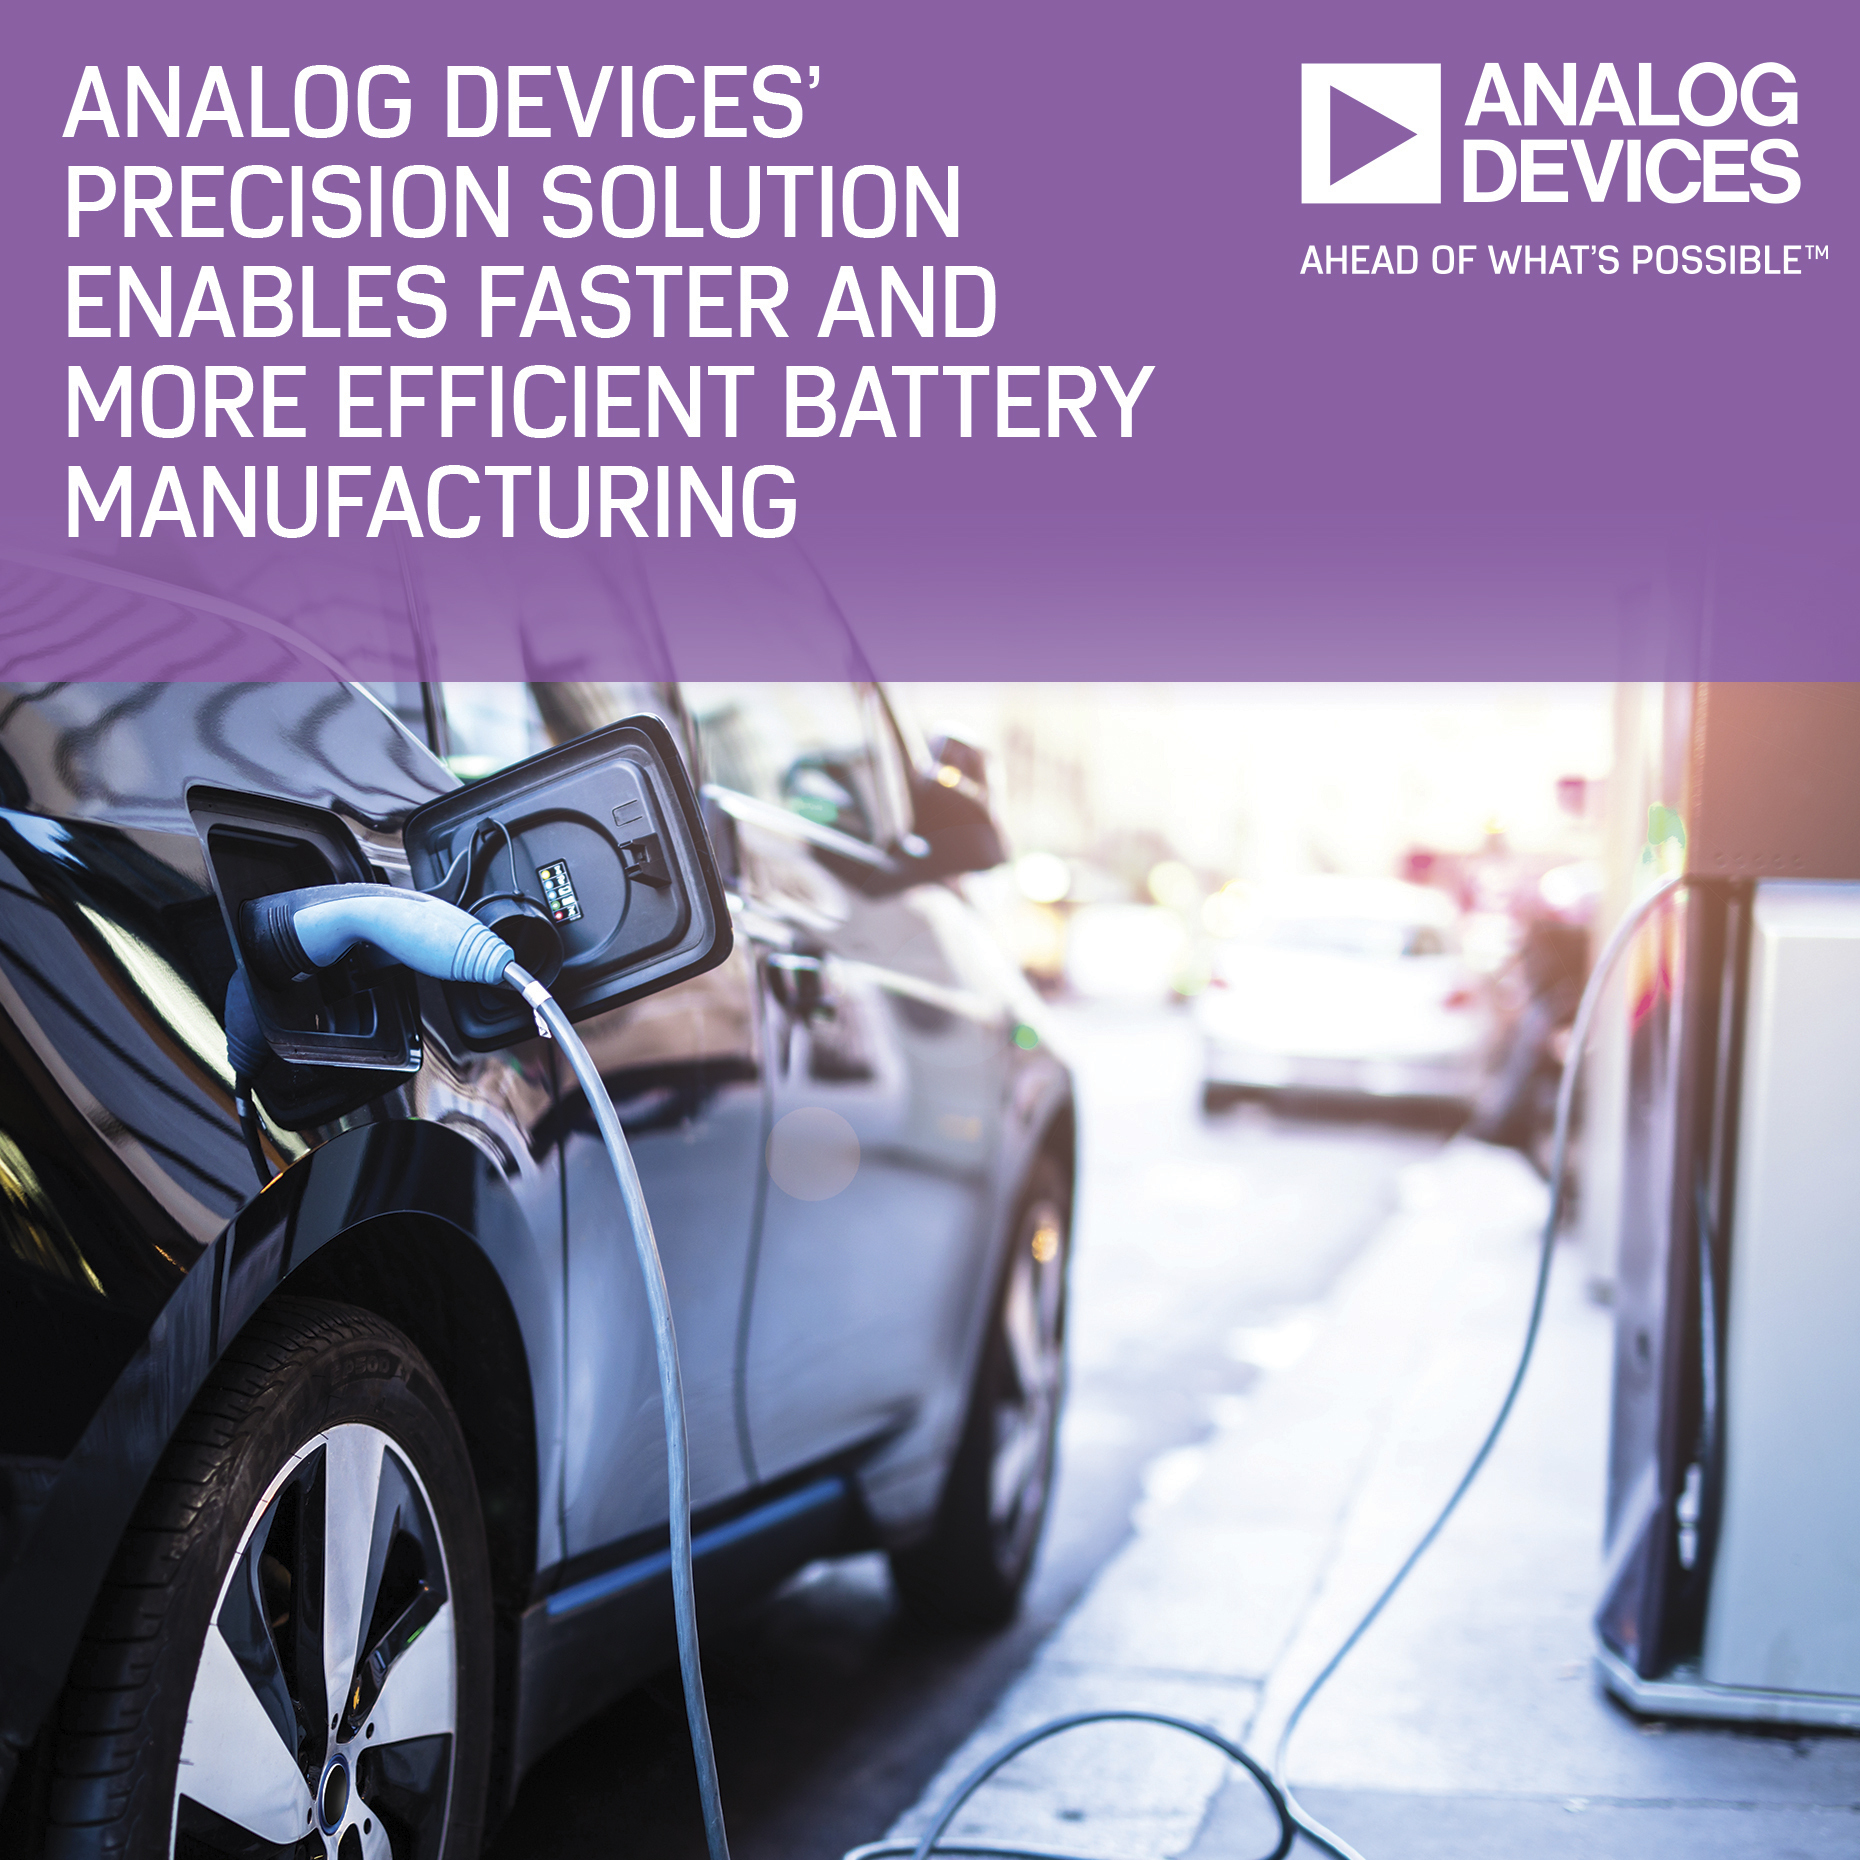 Integrated Precision Solution Enables Safer and Up to 50% More Efficient Battery Manufacturing